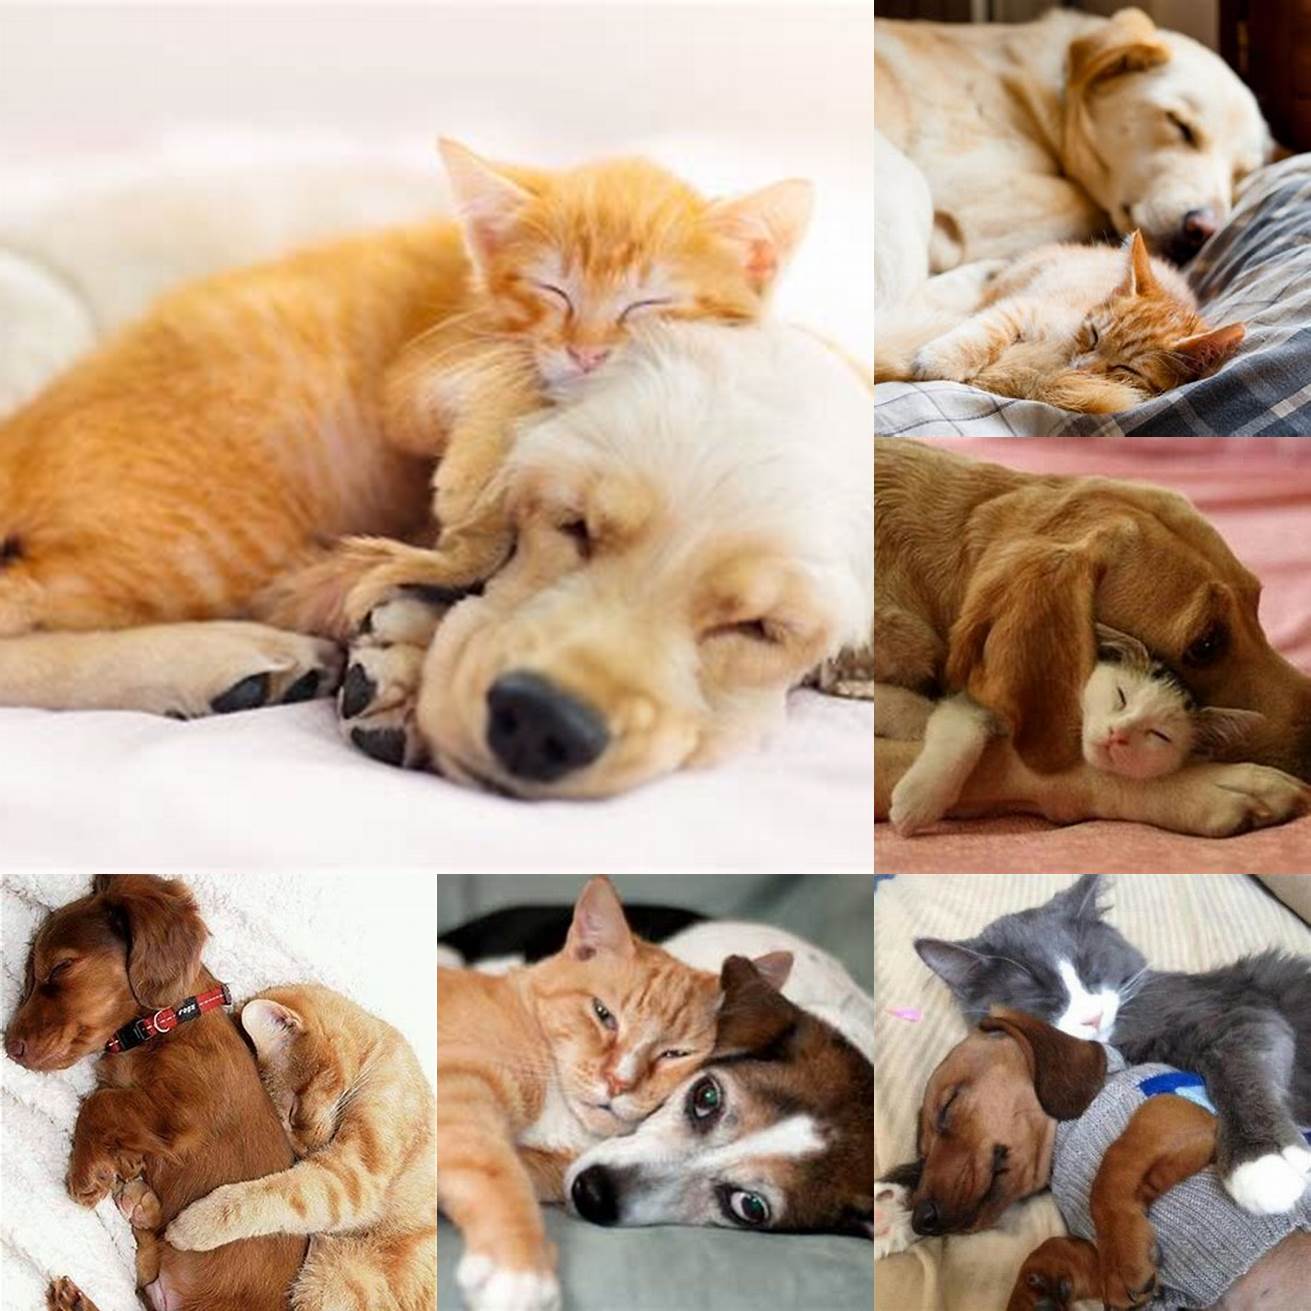 Image of a dog and cat cuddling